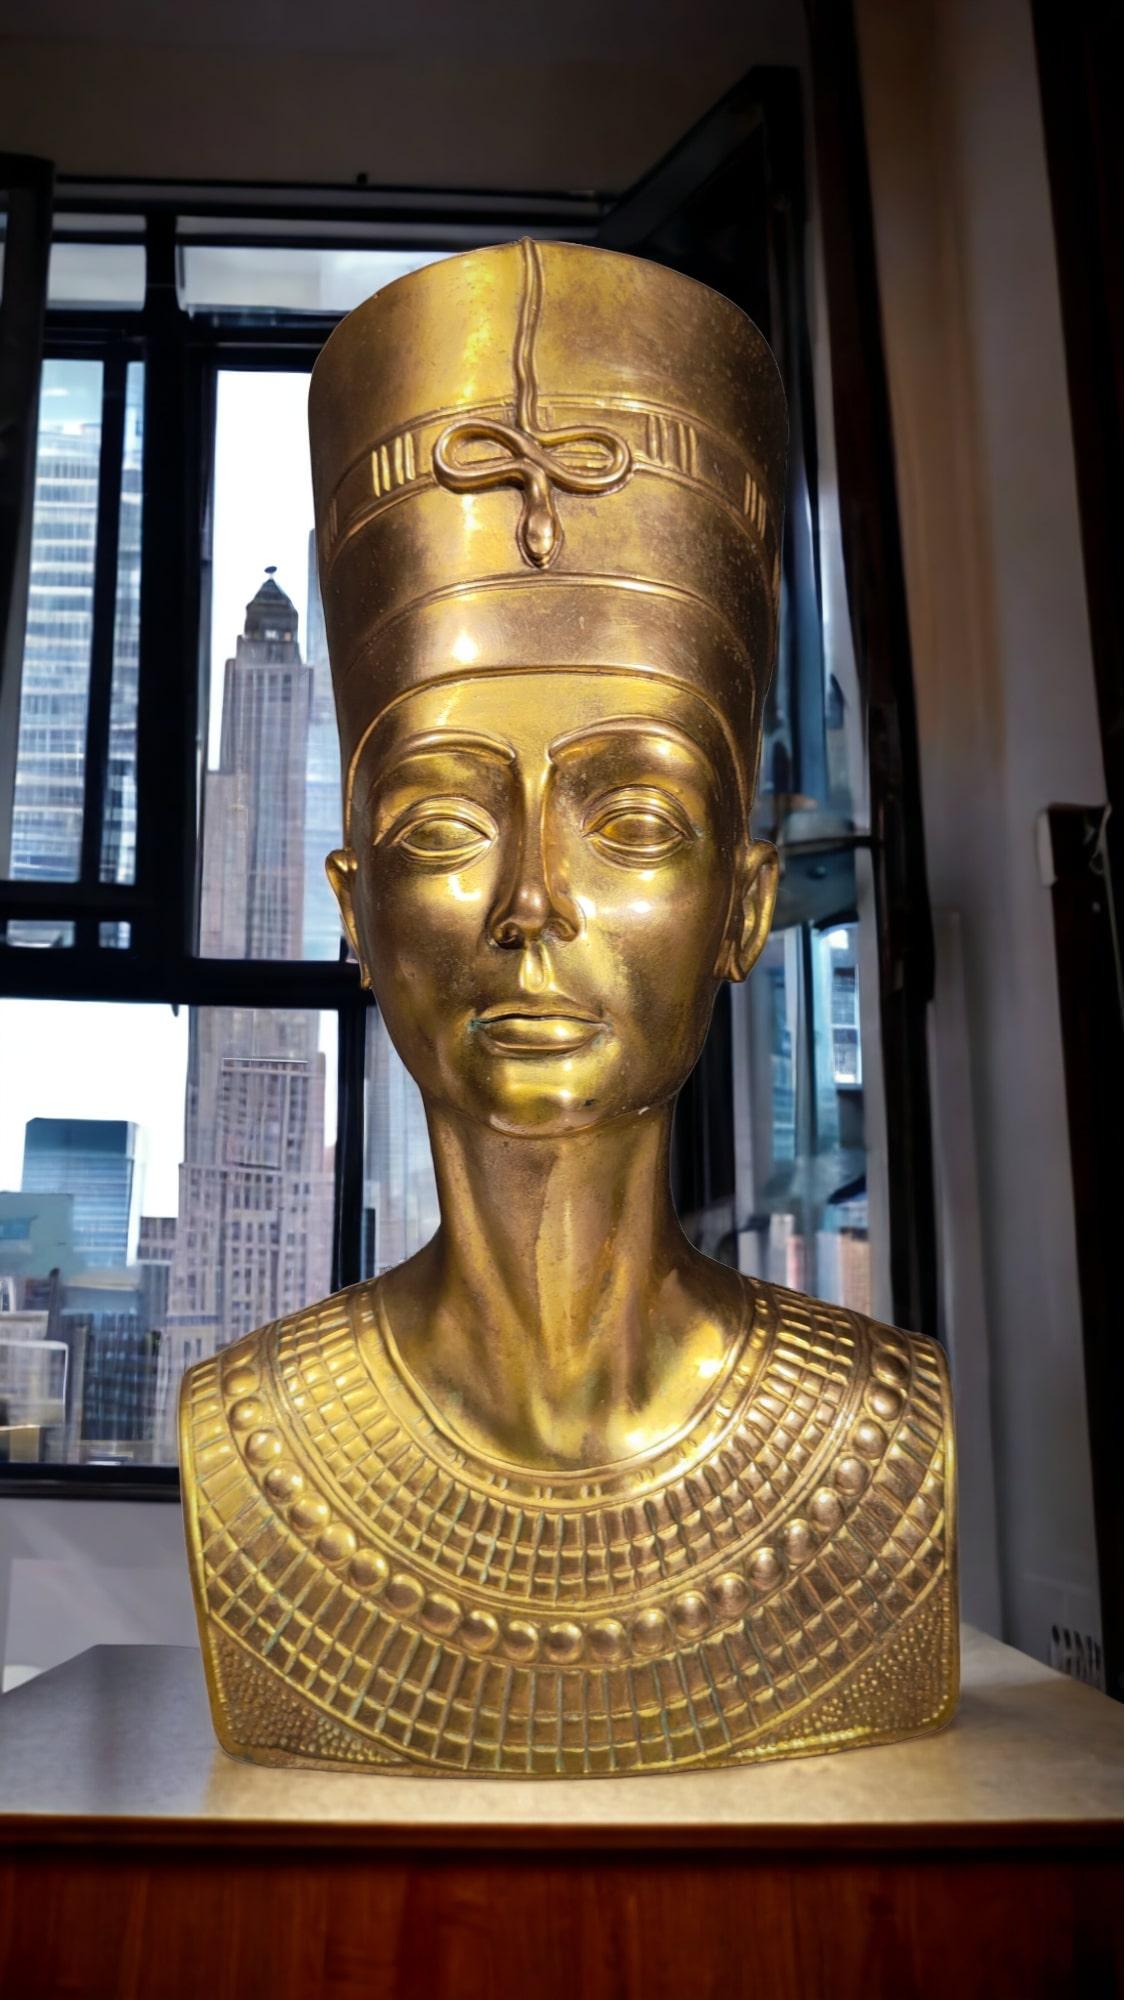 Bust Of Nefertiti In Bronze
Decorative bust of Neferiti in gilded and chiseled bronze. Very detailed and worked on the entire surface. In good condition. Measurements: 45x25x23 cm